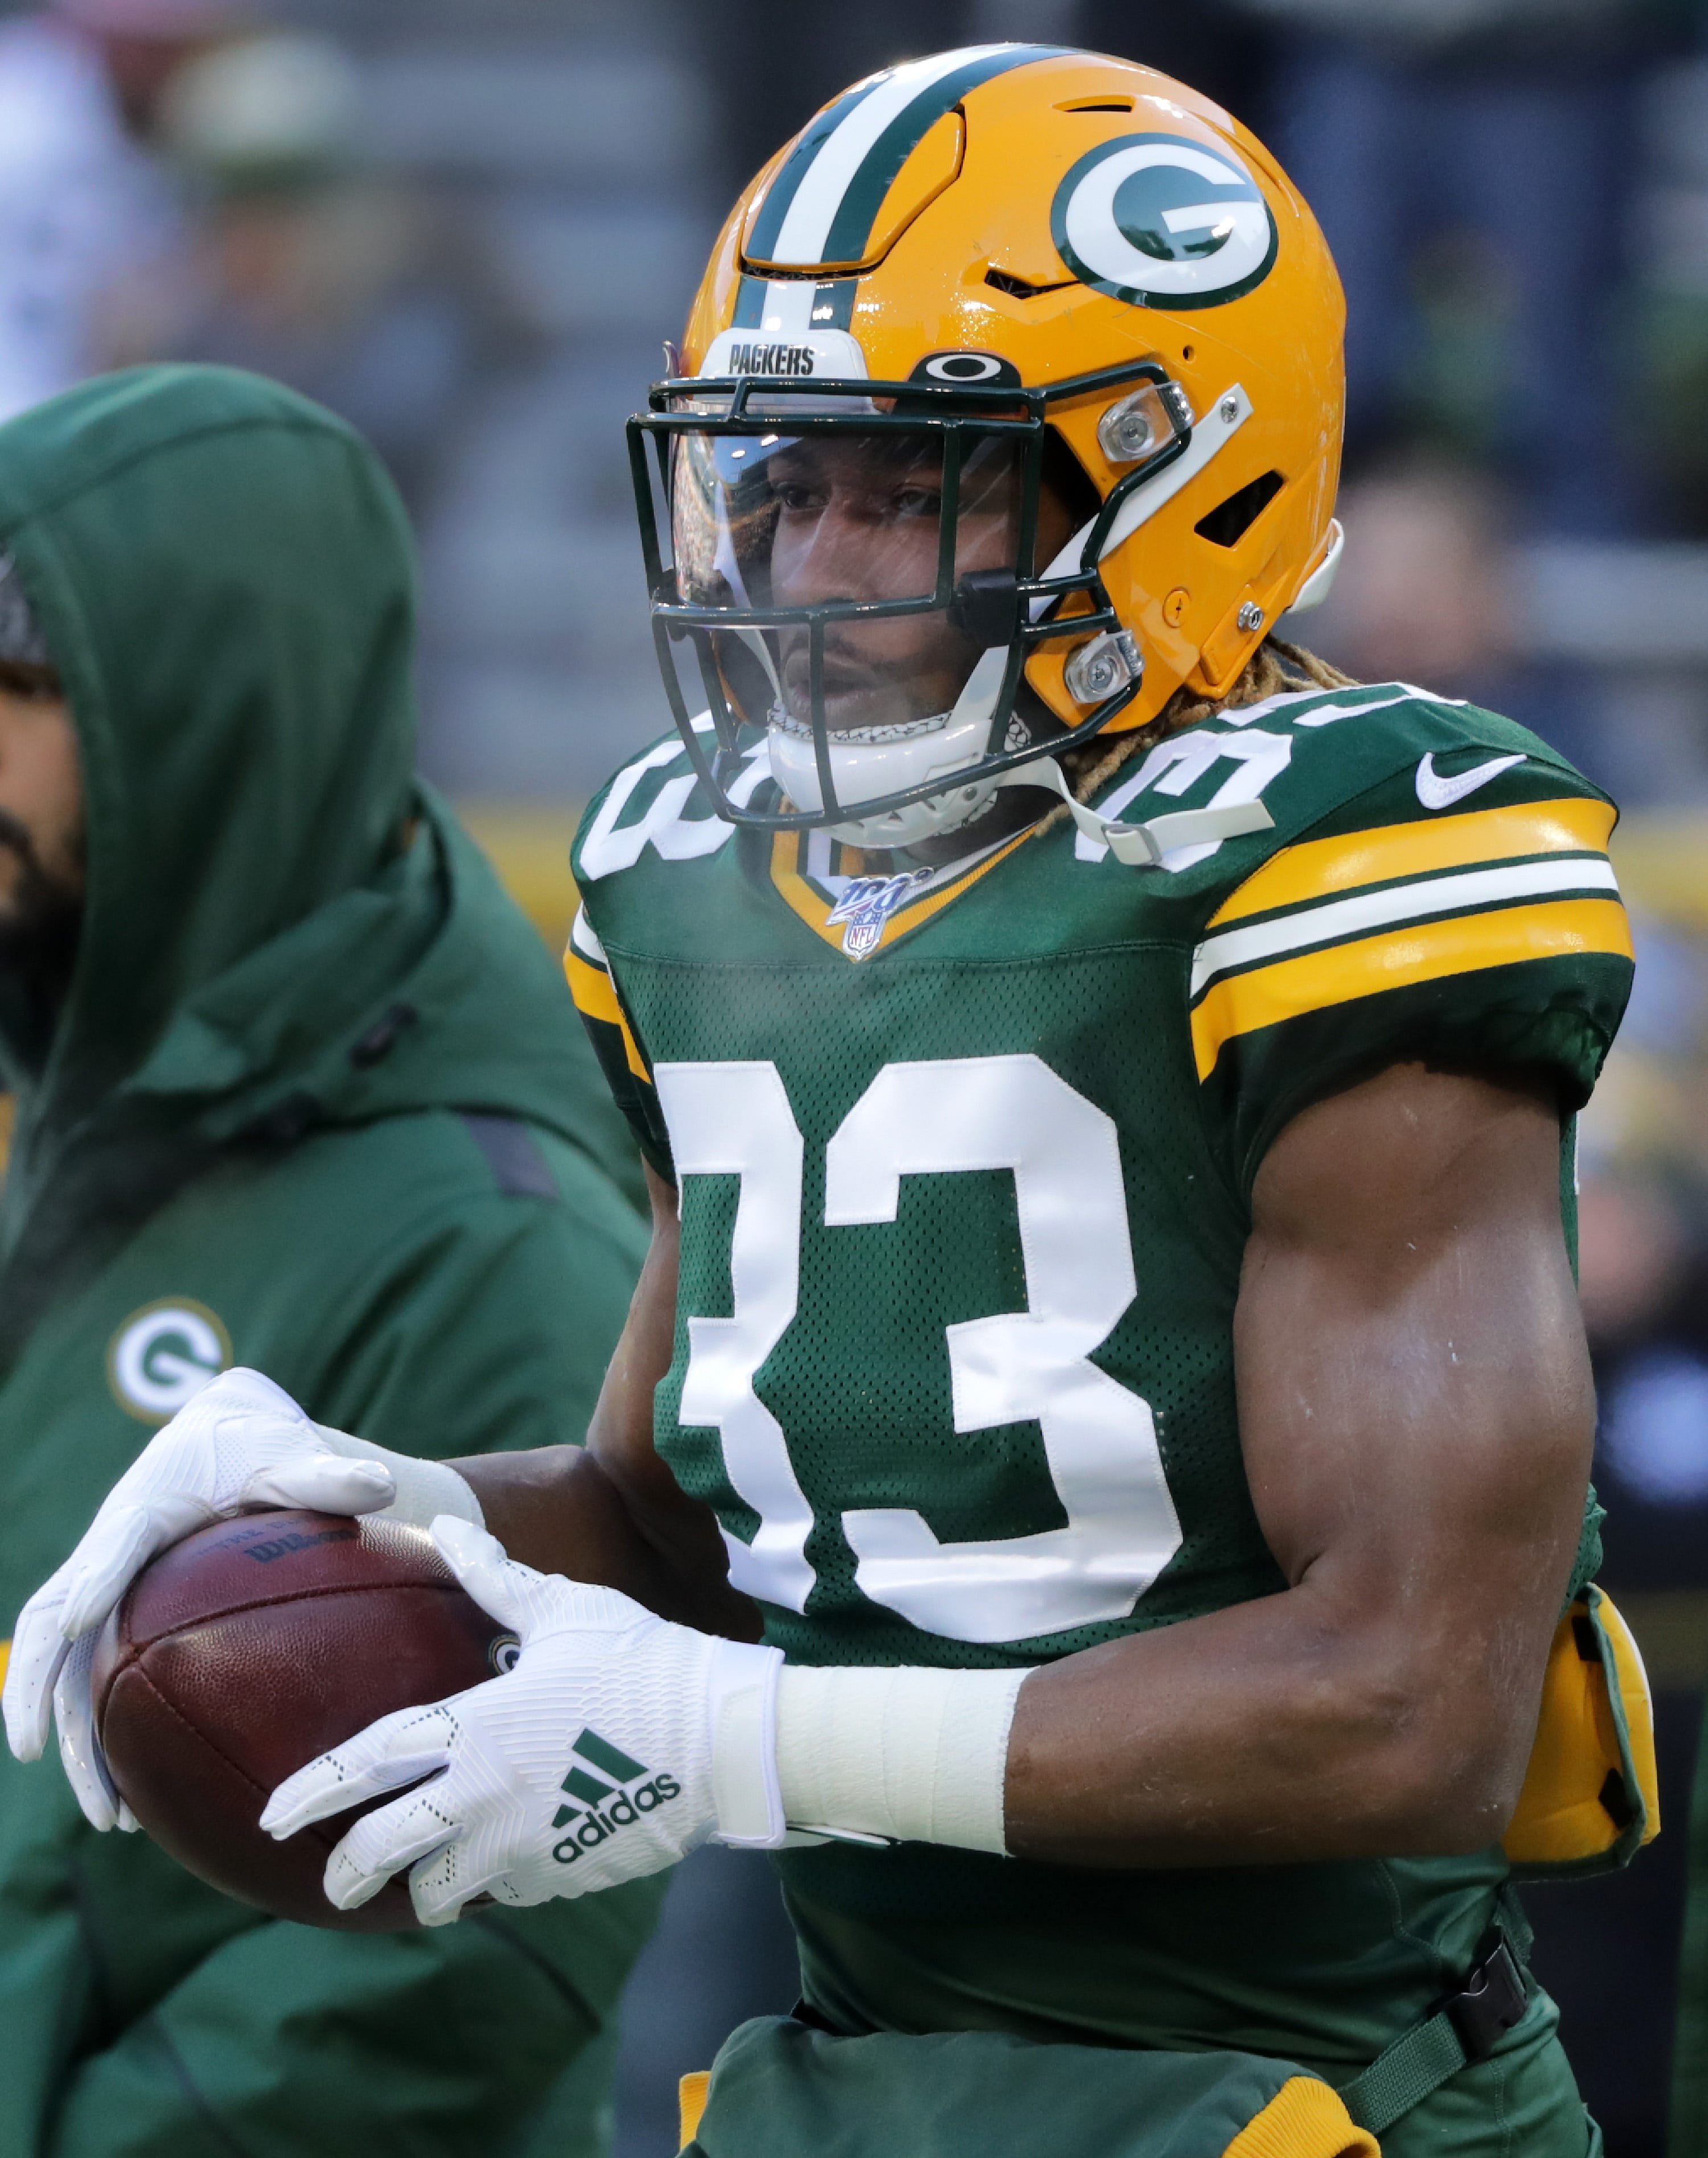 Green Bay Packers running back Aaron Jones (33) warms up before the Packers host the Chicago Bears on Sunday, December 15, 2019, at Lambeau Field in Green Bay, Wis.